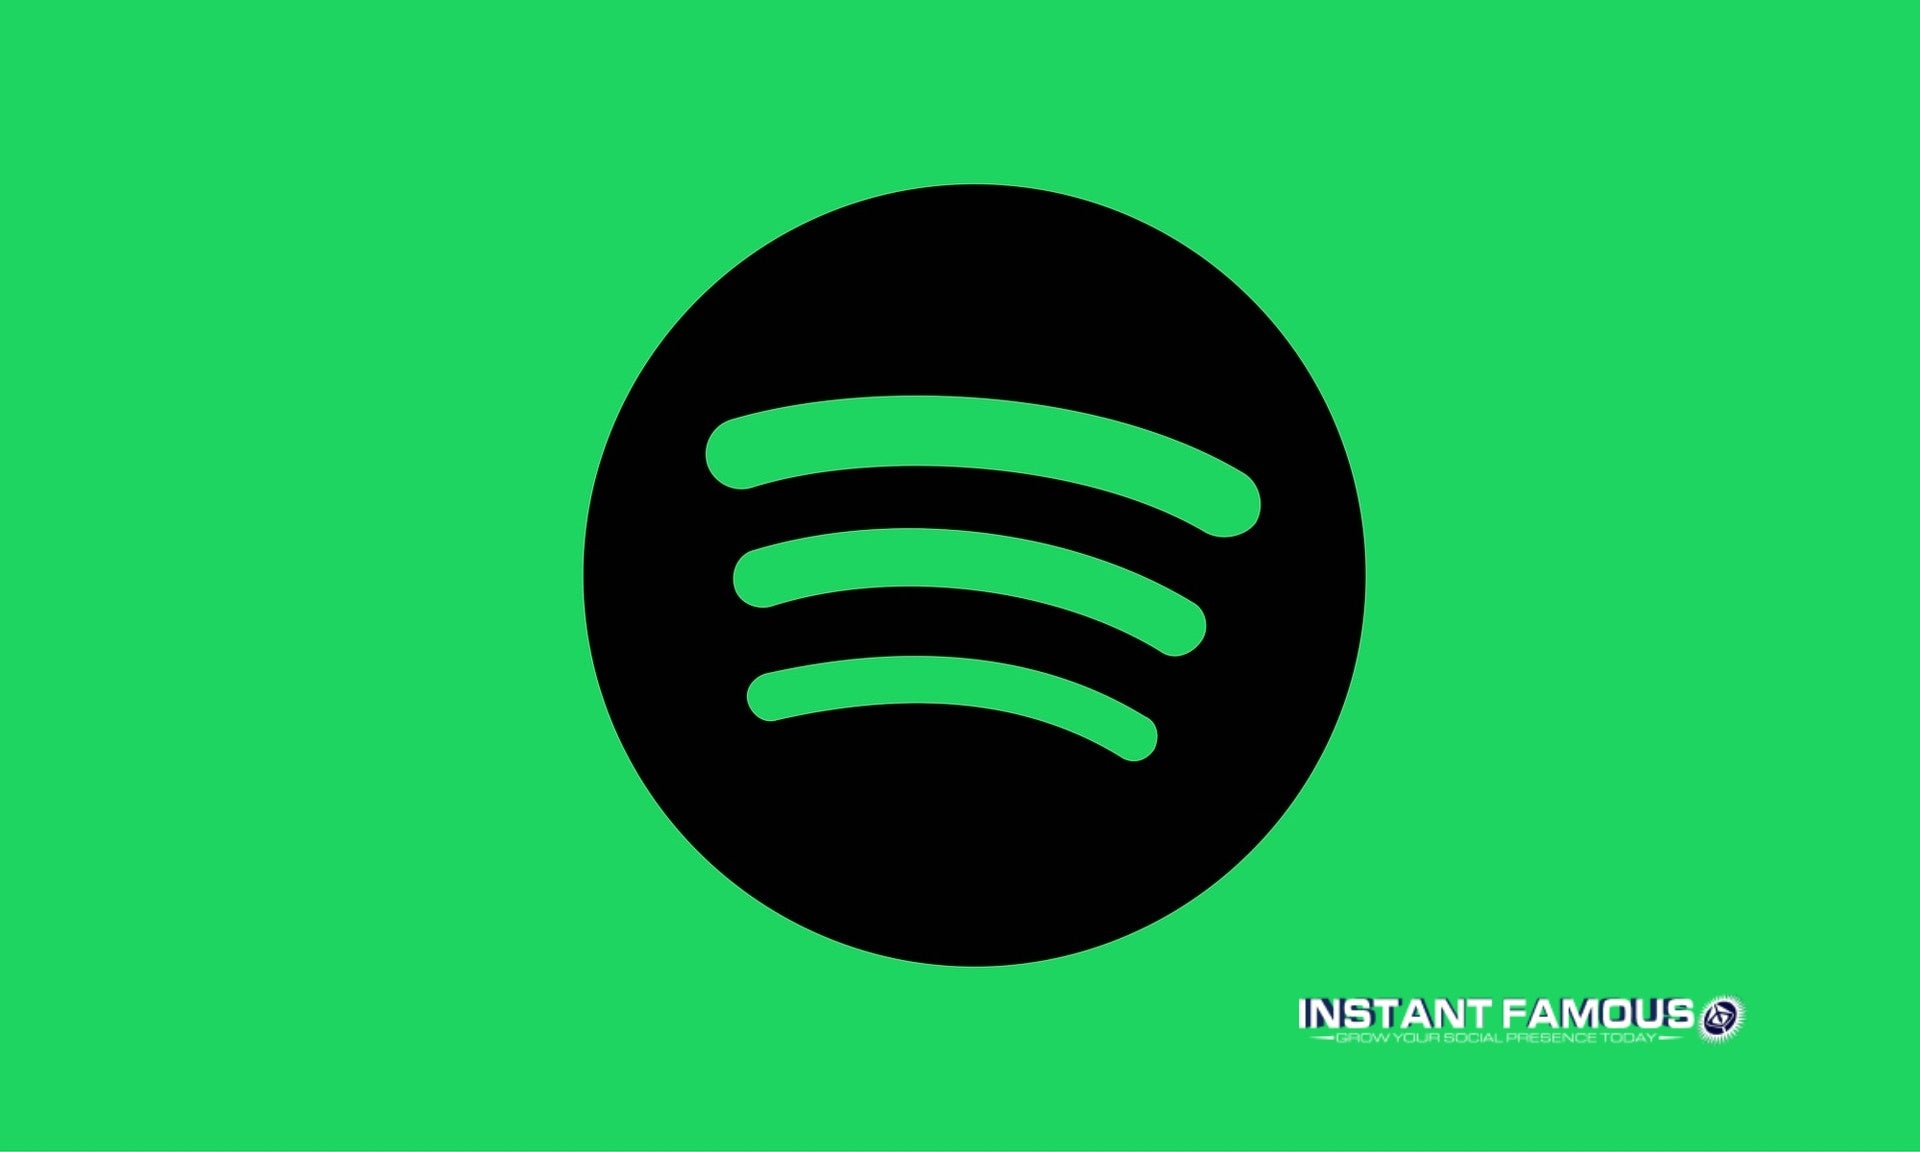 Top Tips for Getting More Spotify Plays